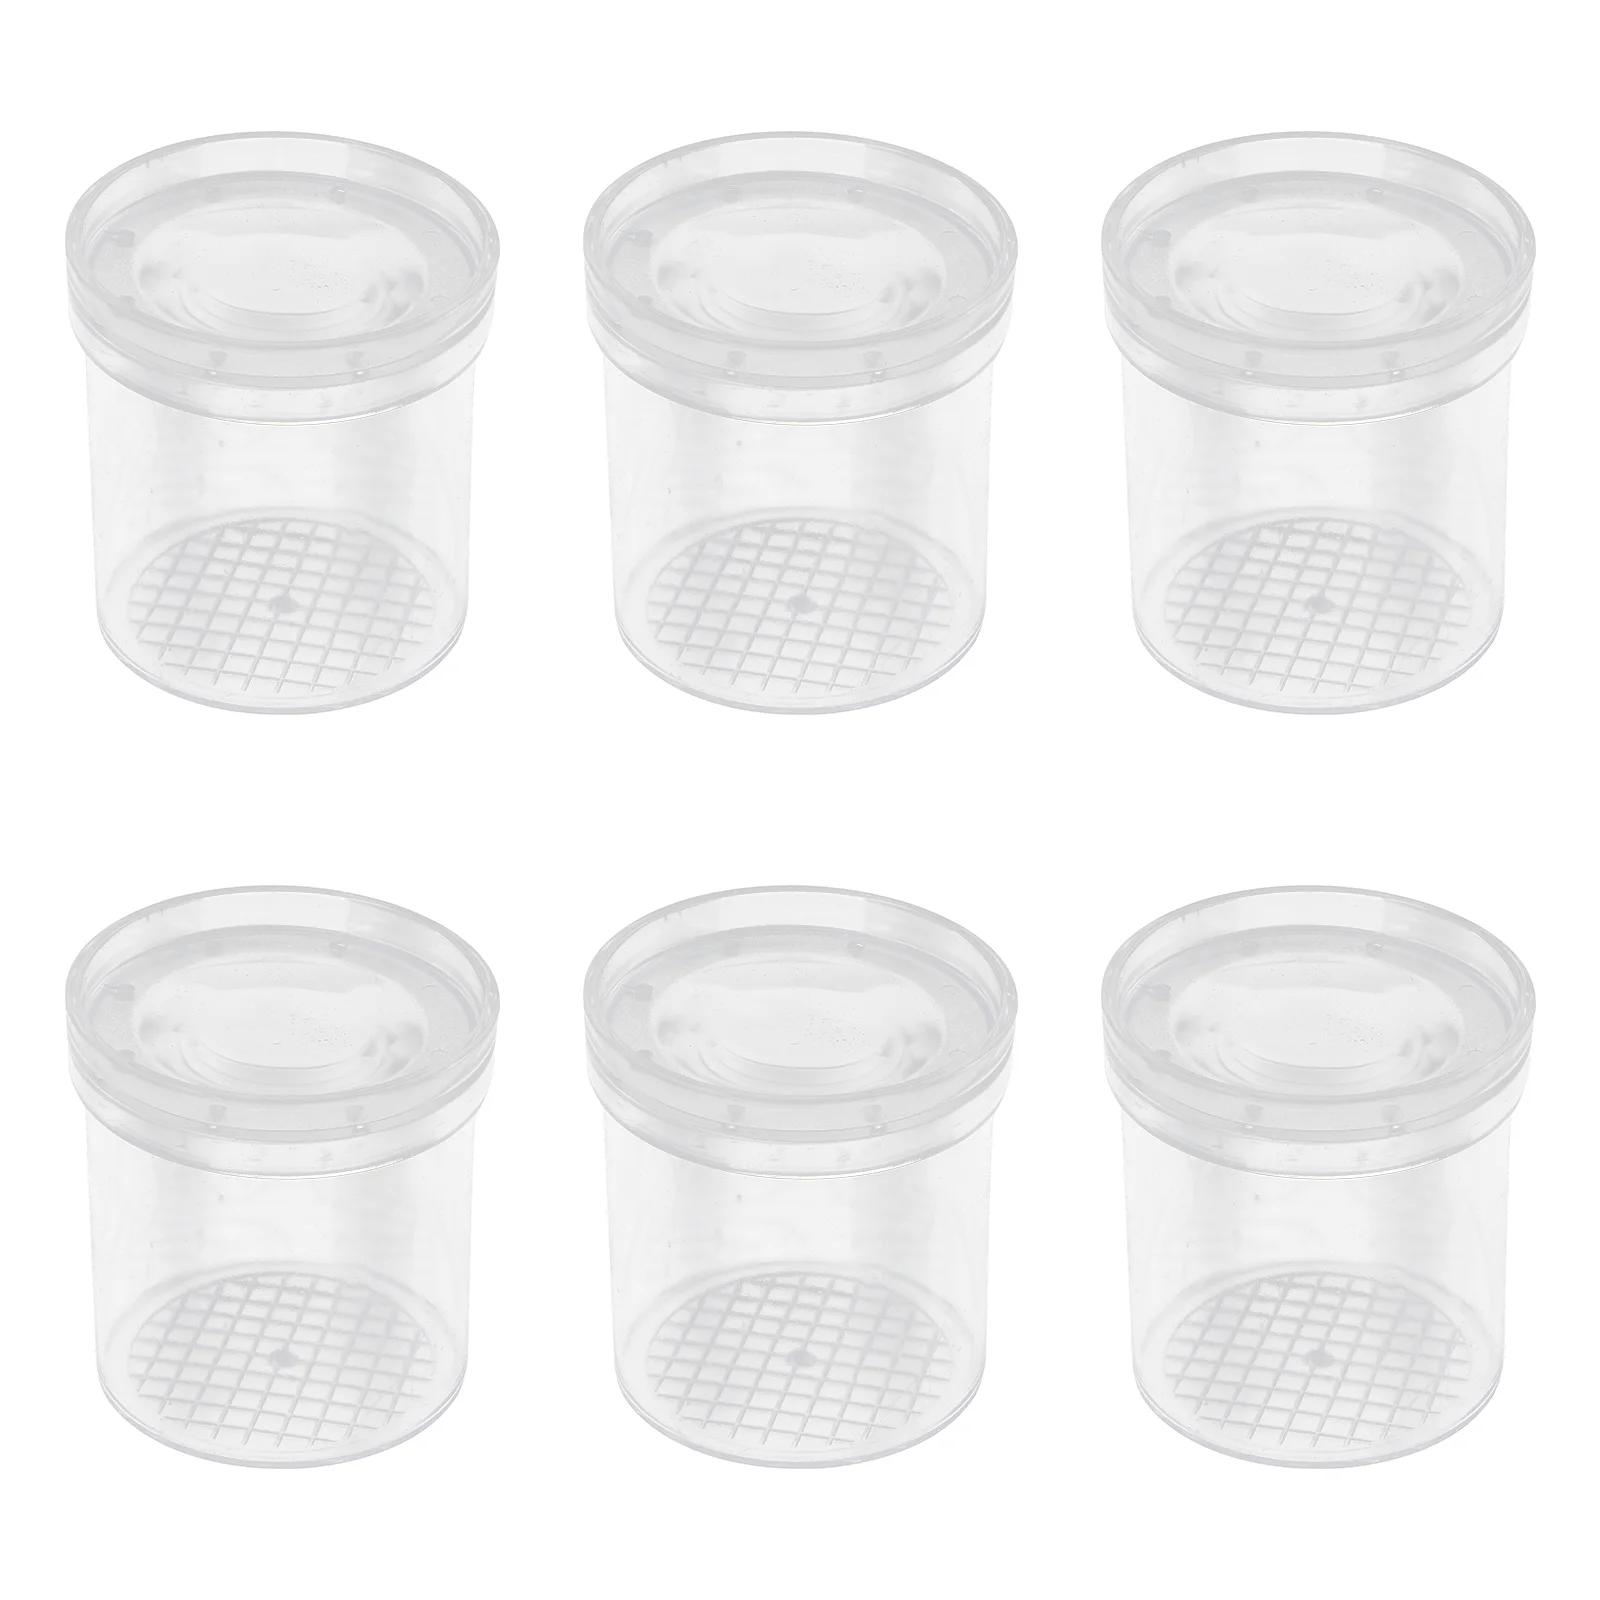 6 Pcs Insect Observation Cup Cage Kids Viewer Outdoor Play Toys Educational Exploration Gadget Child Fence Magnifying Bug Tool